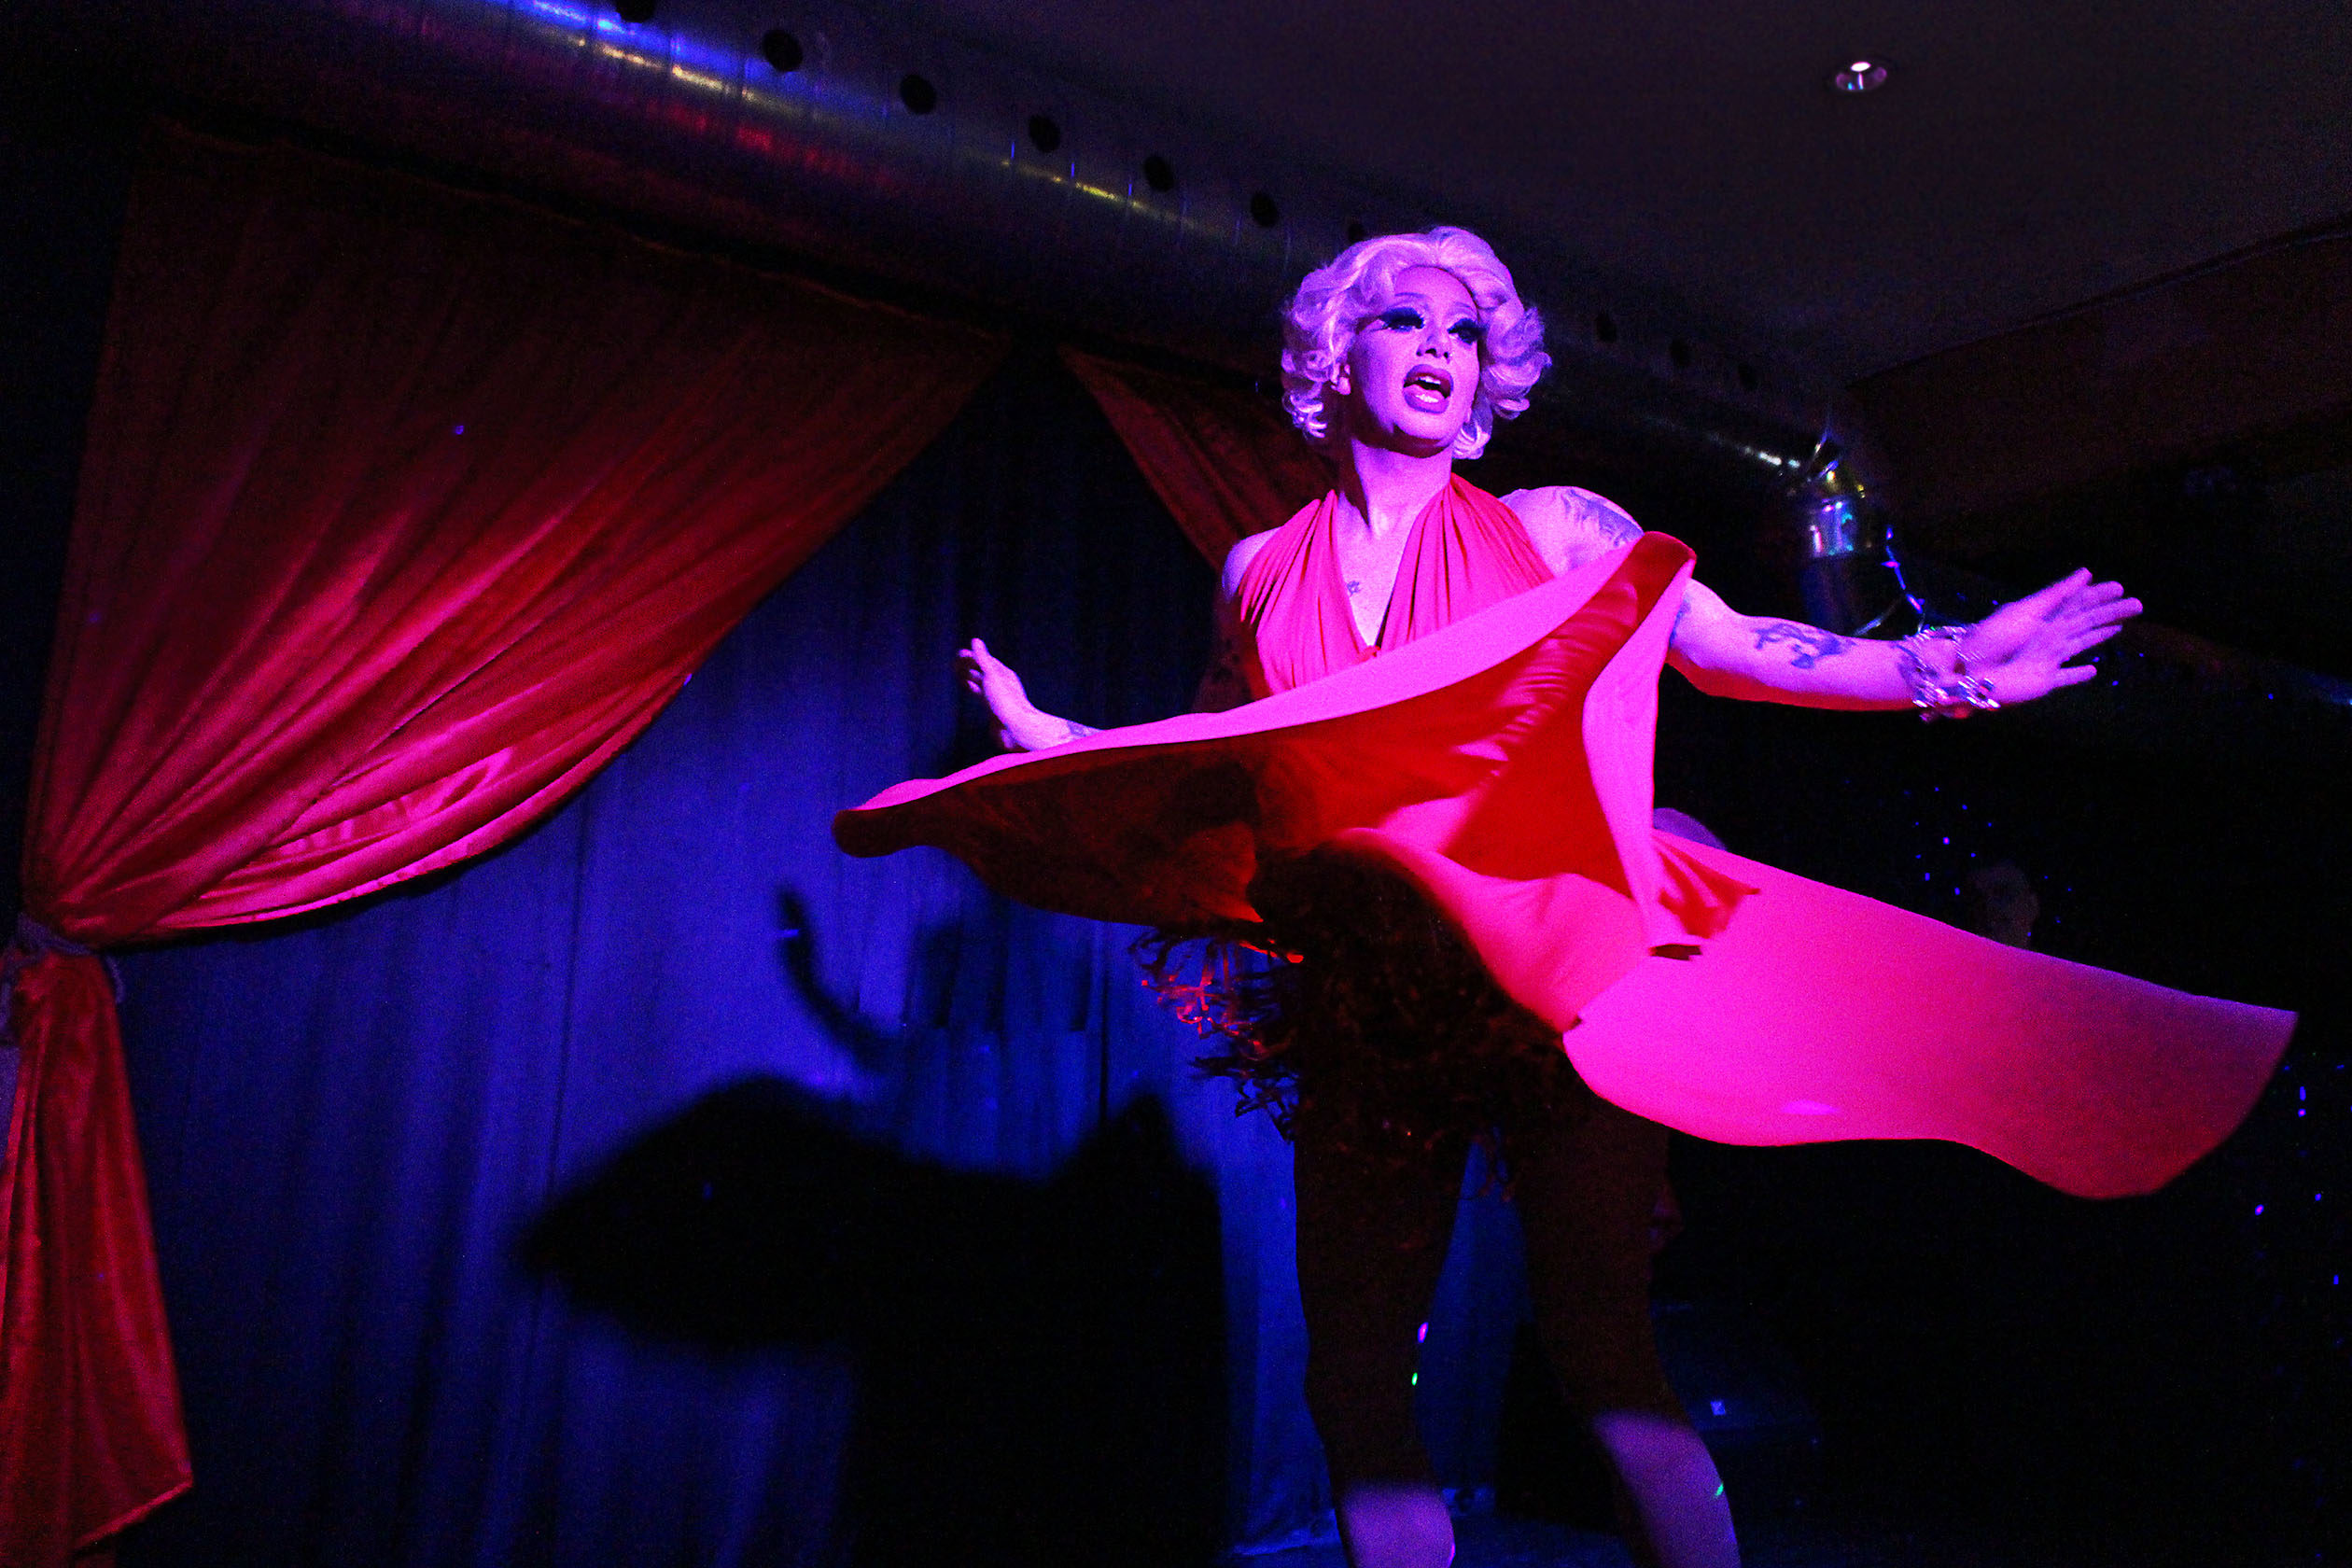 Scarlett Bobo performing on stage in a red outfit, with red curtains in the background.